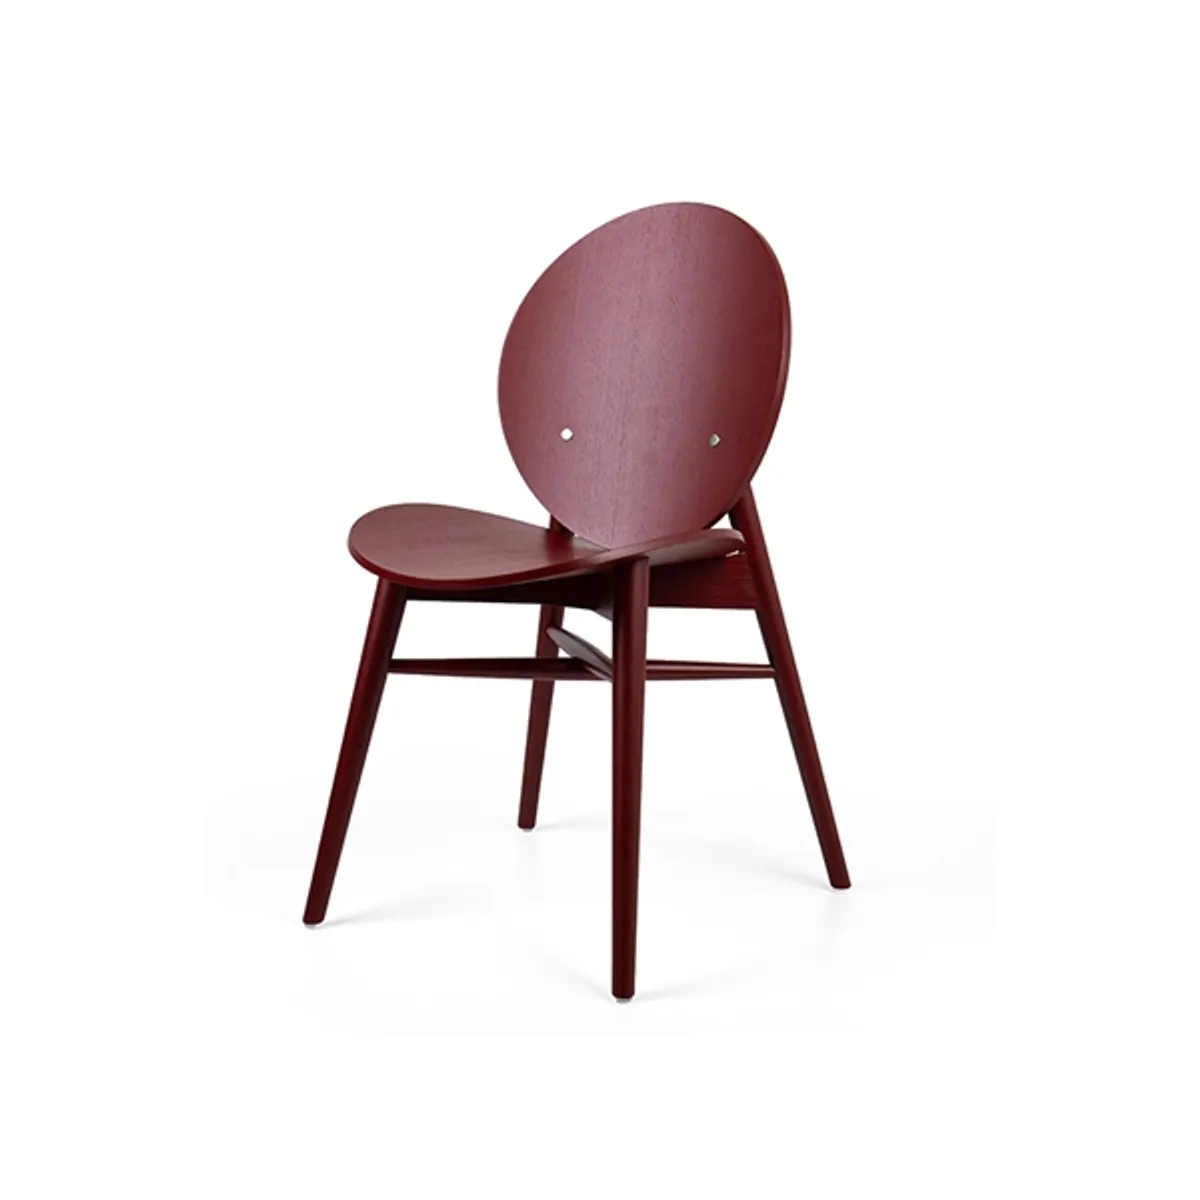 Eder wood chair Inside Out Contracts3